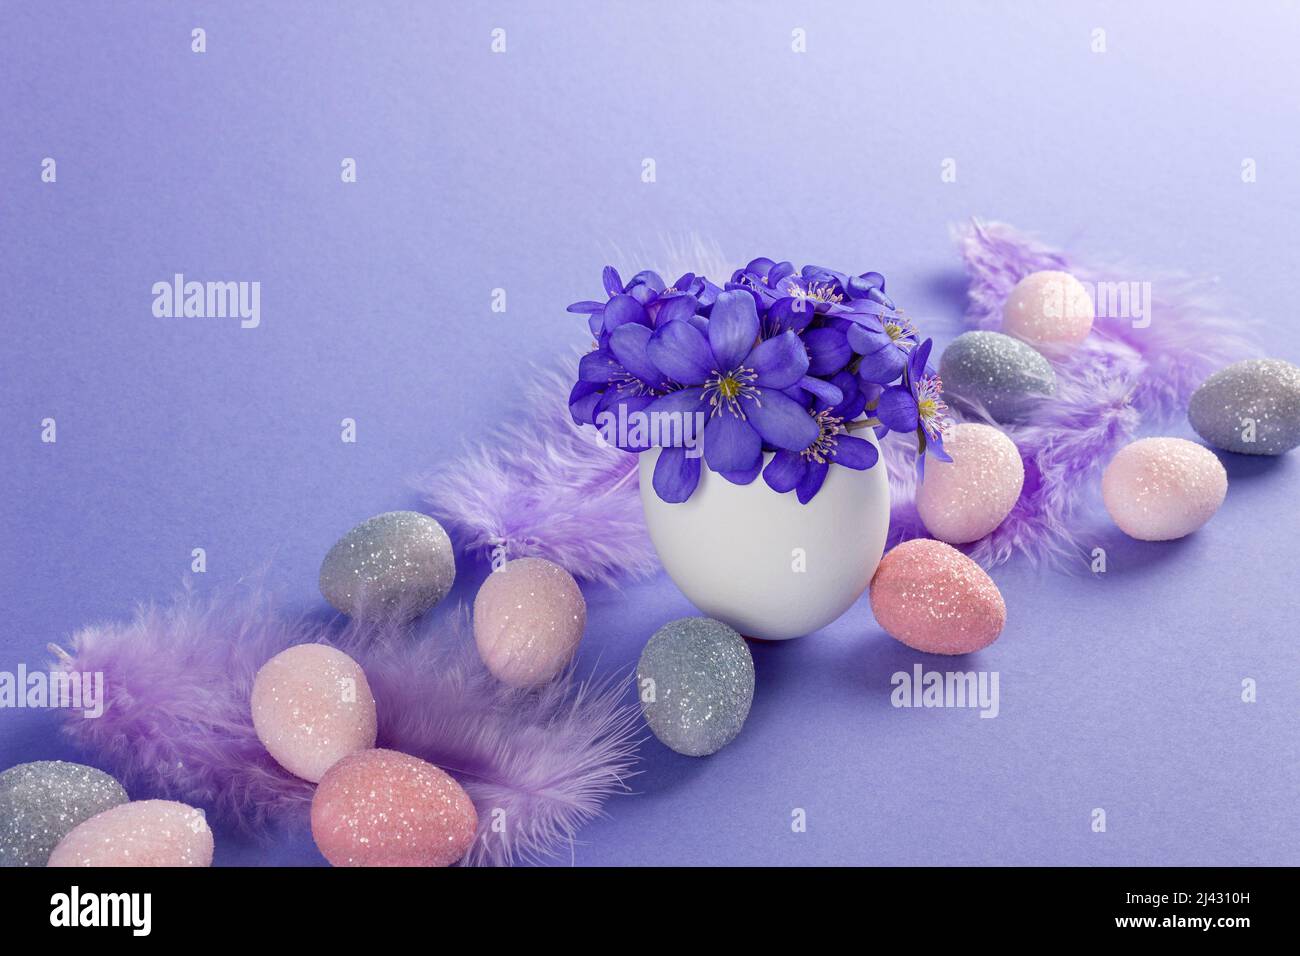 Happy Easter concept. Easter eggs with hepatica flowers and feathers on purple background. Stock Photo